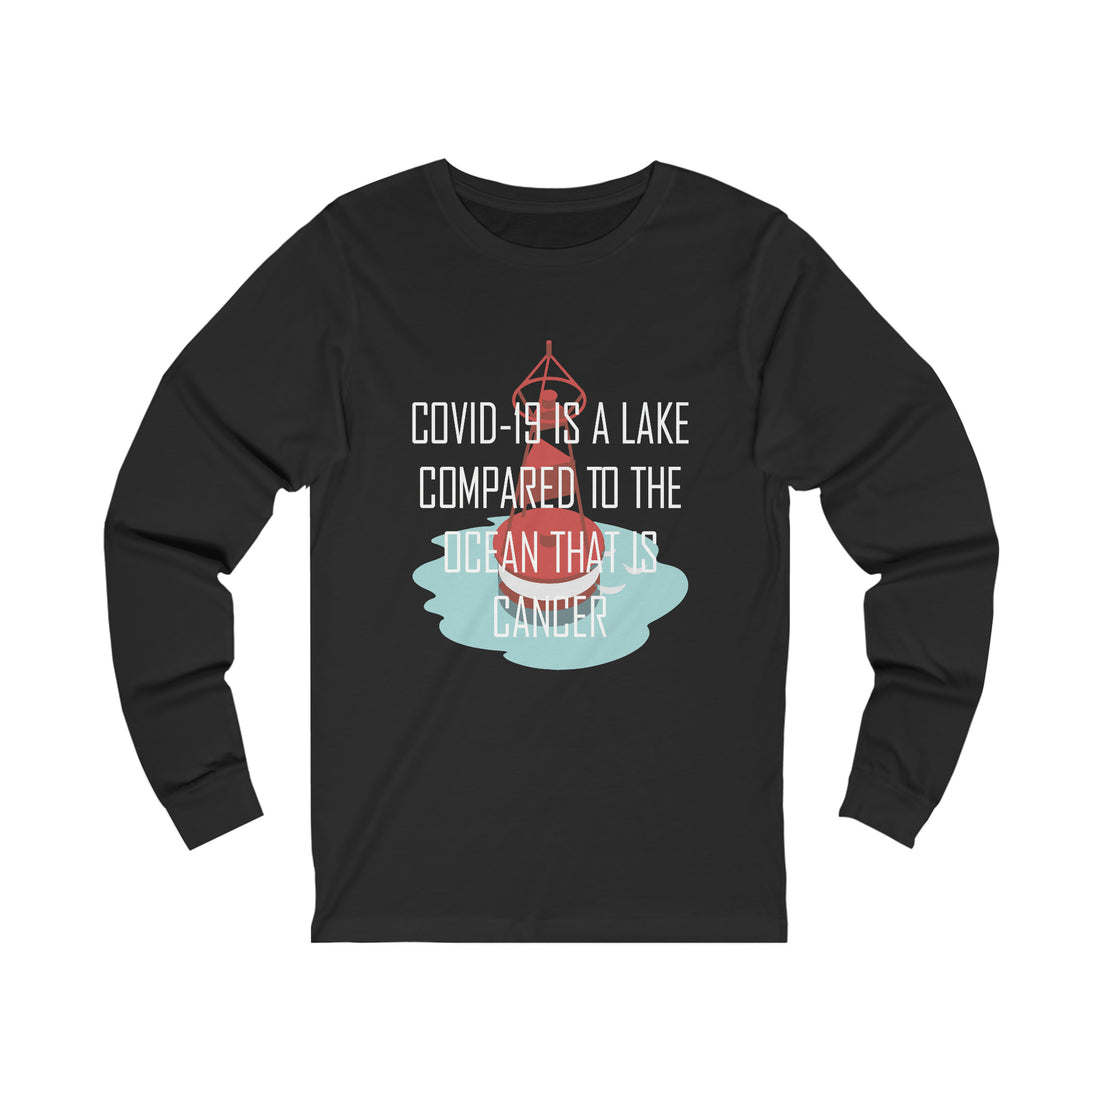 Covid-19 Is A Lake Compared To The Ocean That Is Cancer - Unisex Jersey Long Sleeve Tee